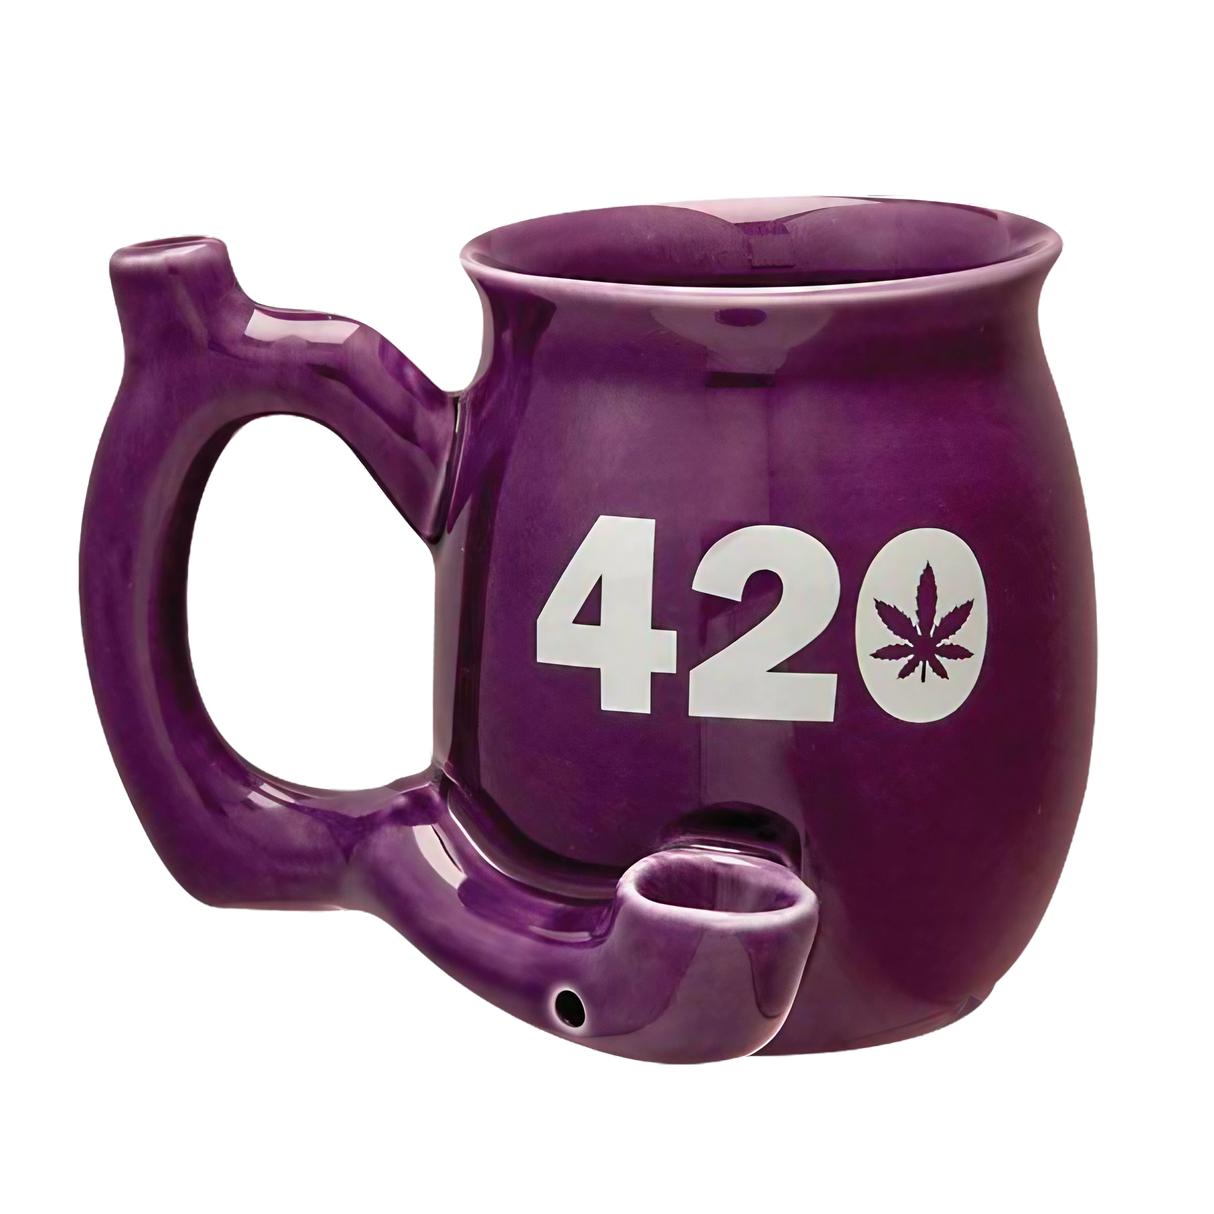 Roast & Toast 420 Ceramic Mug Pipe in Black with Novelty Design - Front View